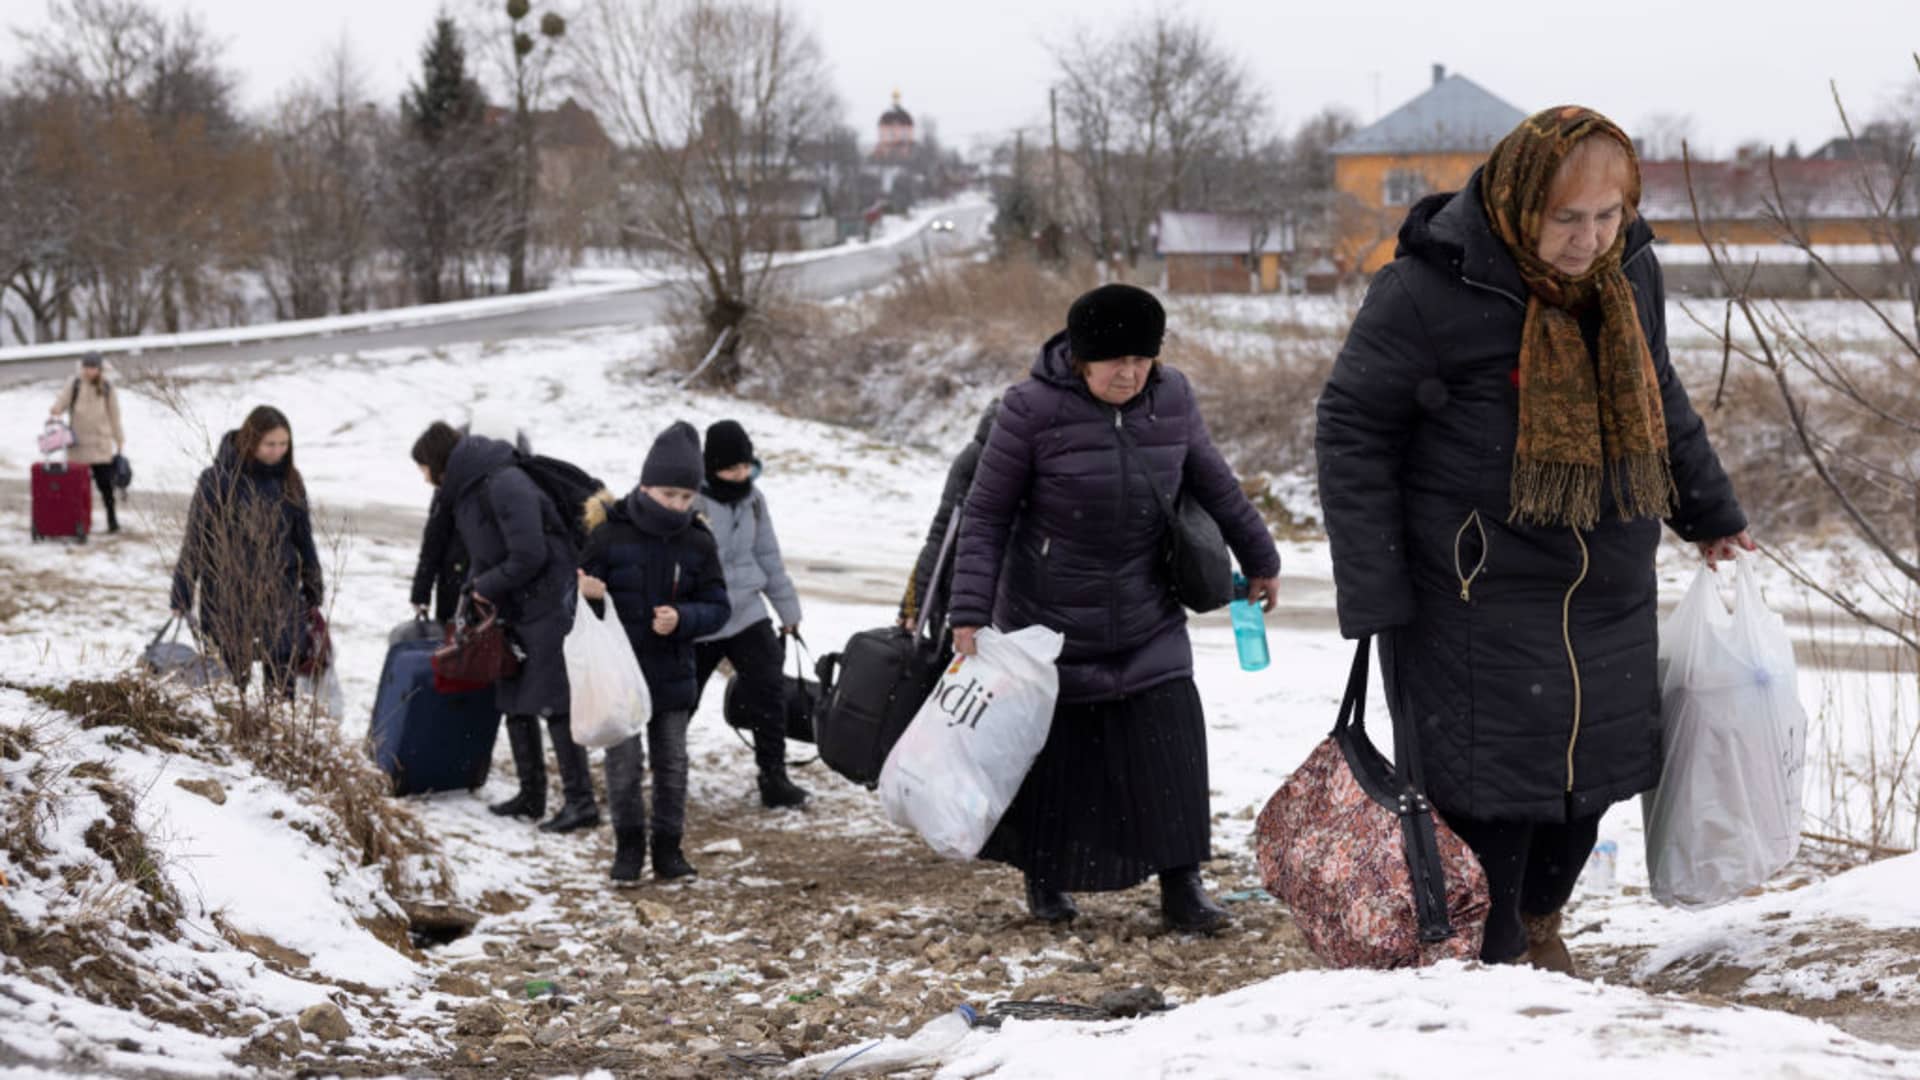 Refugees fleeing conflict make their way to the Krakovets border crossing with Poland on March 09, 2022 in Krakovets, Ukraine.